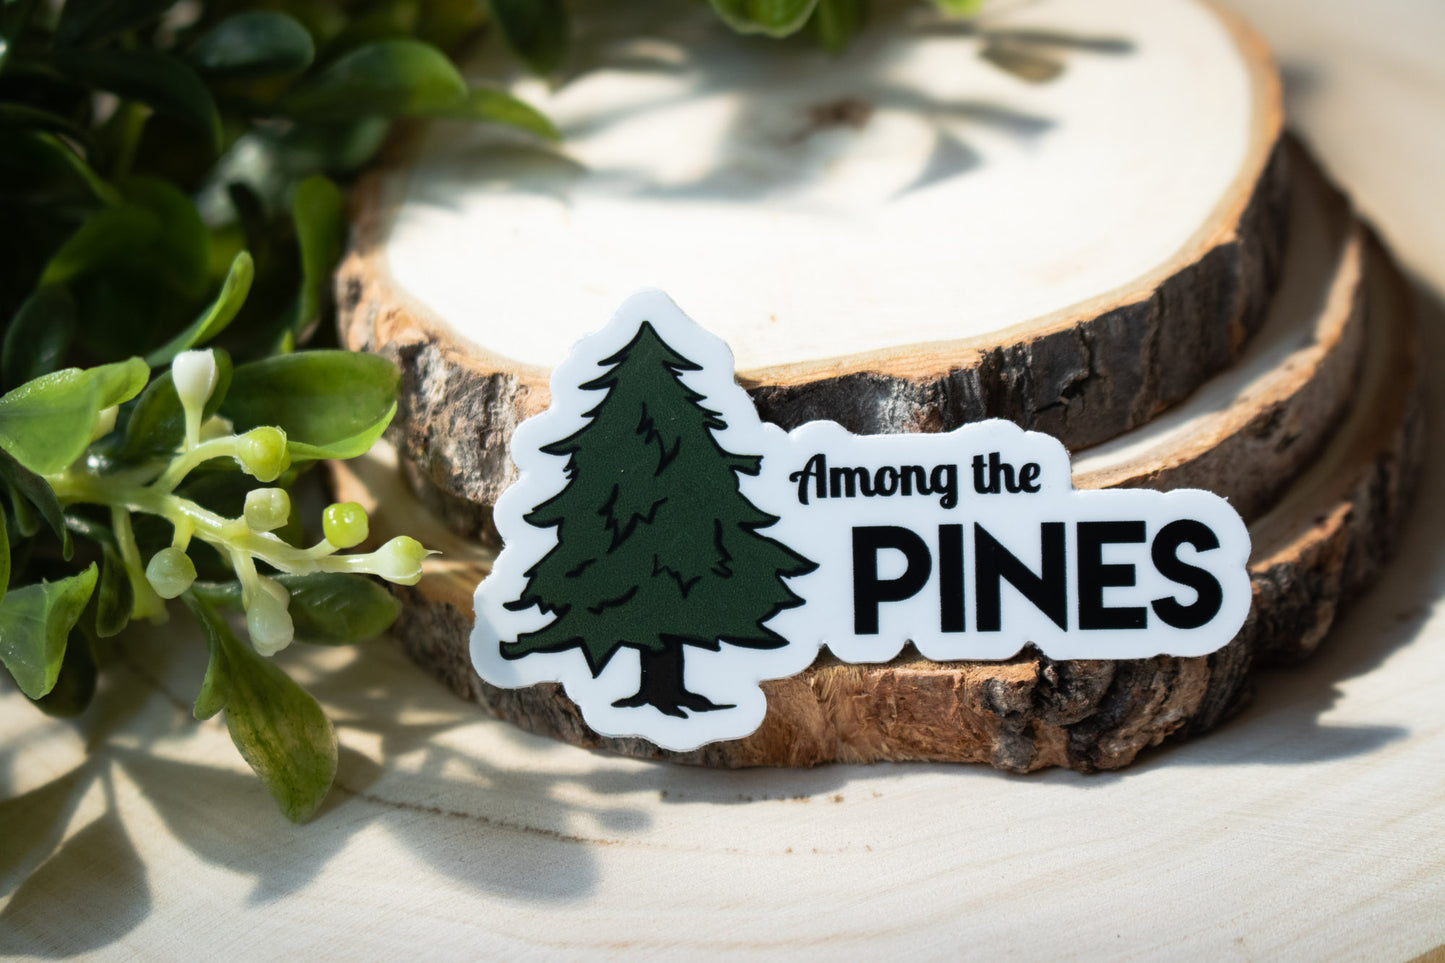 White sticker with forest green pinetree illustration and txt reading "among the pines"